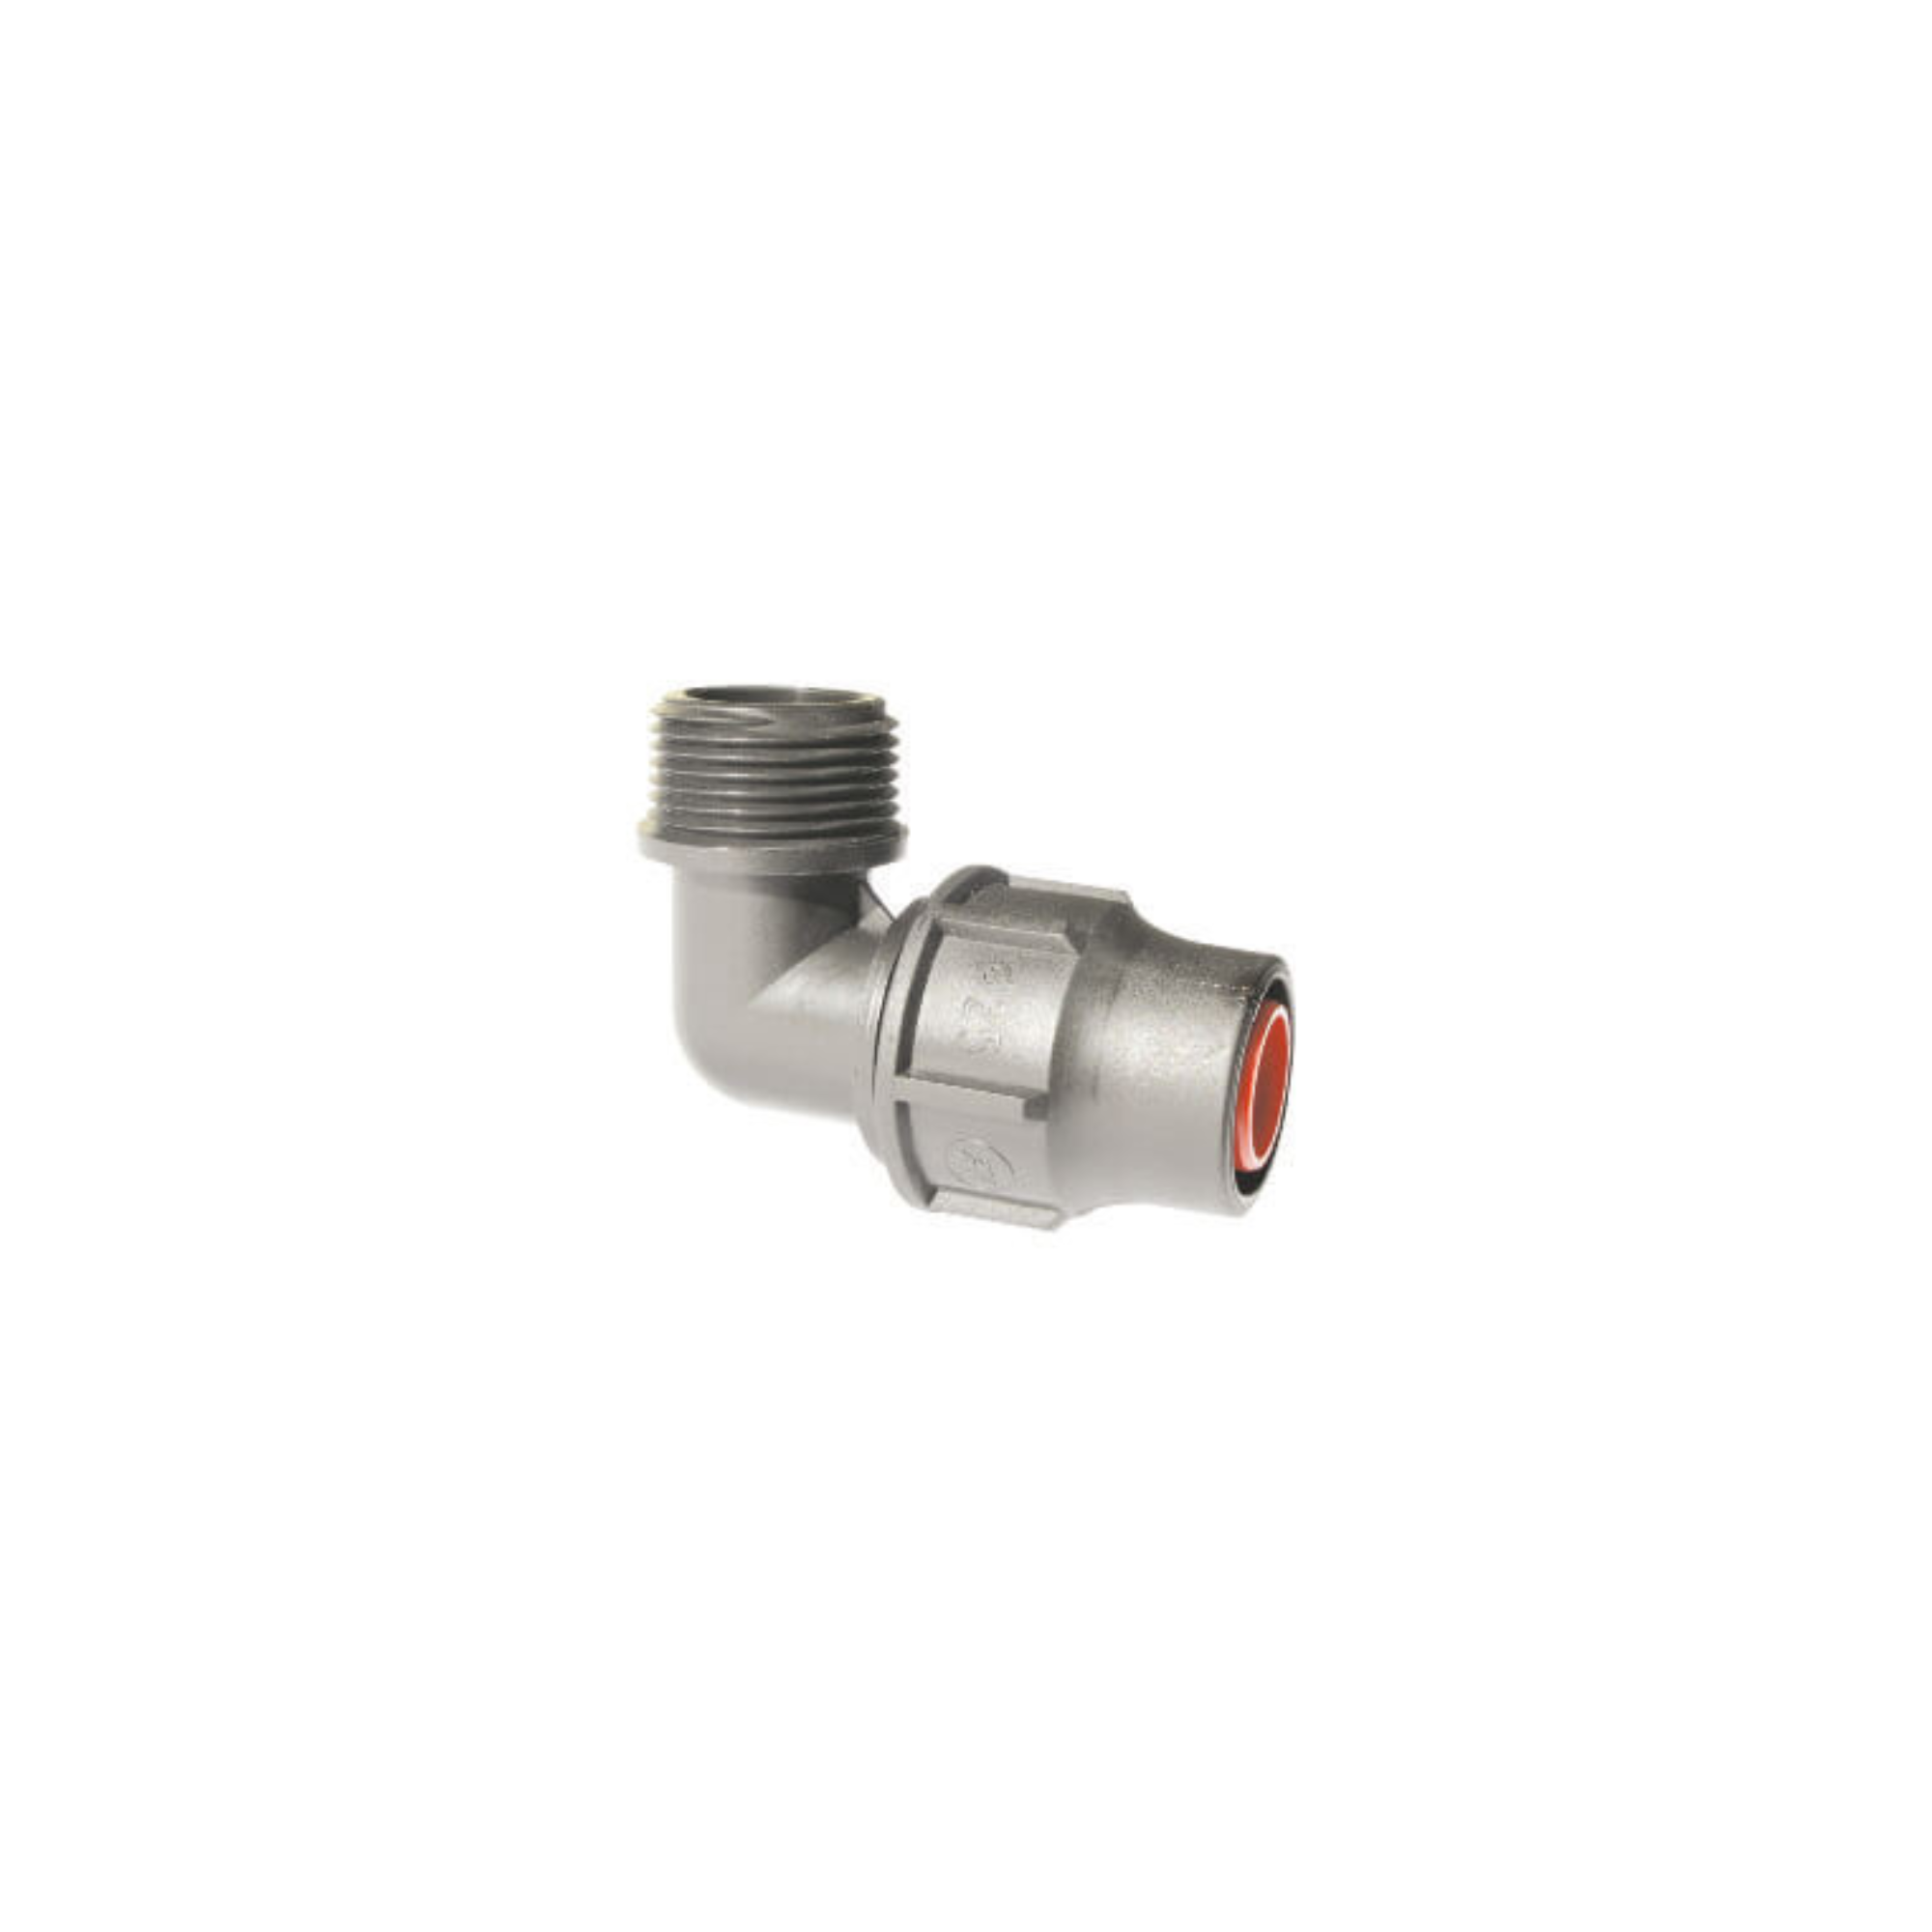 Lock Fittings for 16mm (13.5mm) LDPE Pipe